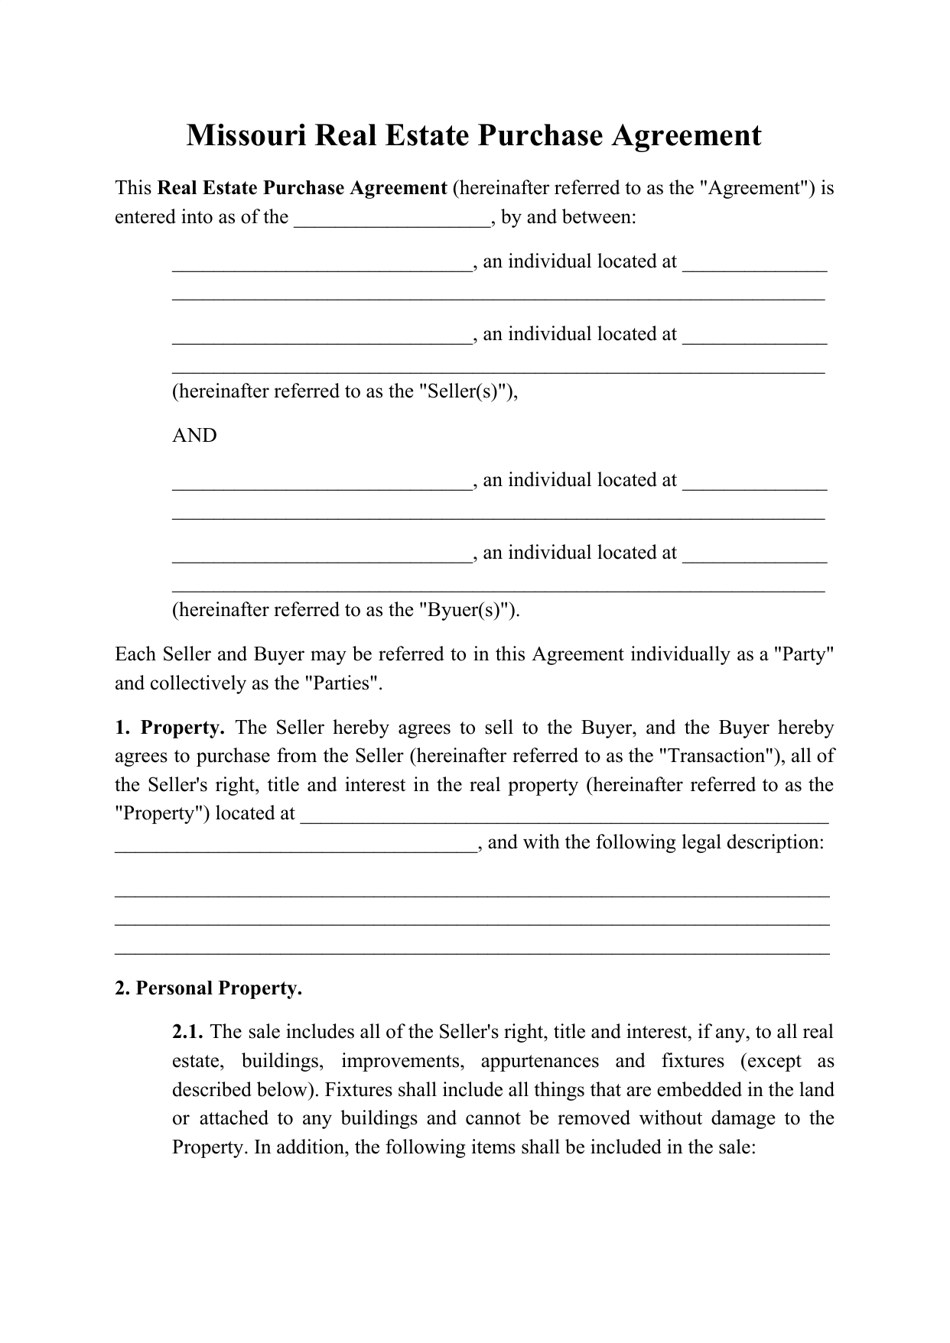 Real Estate Purchase Agreement Template - Missouri, Page 1